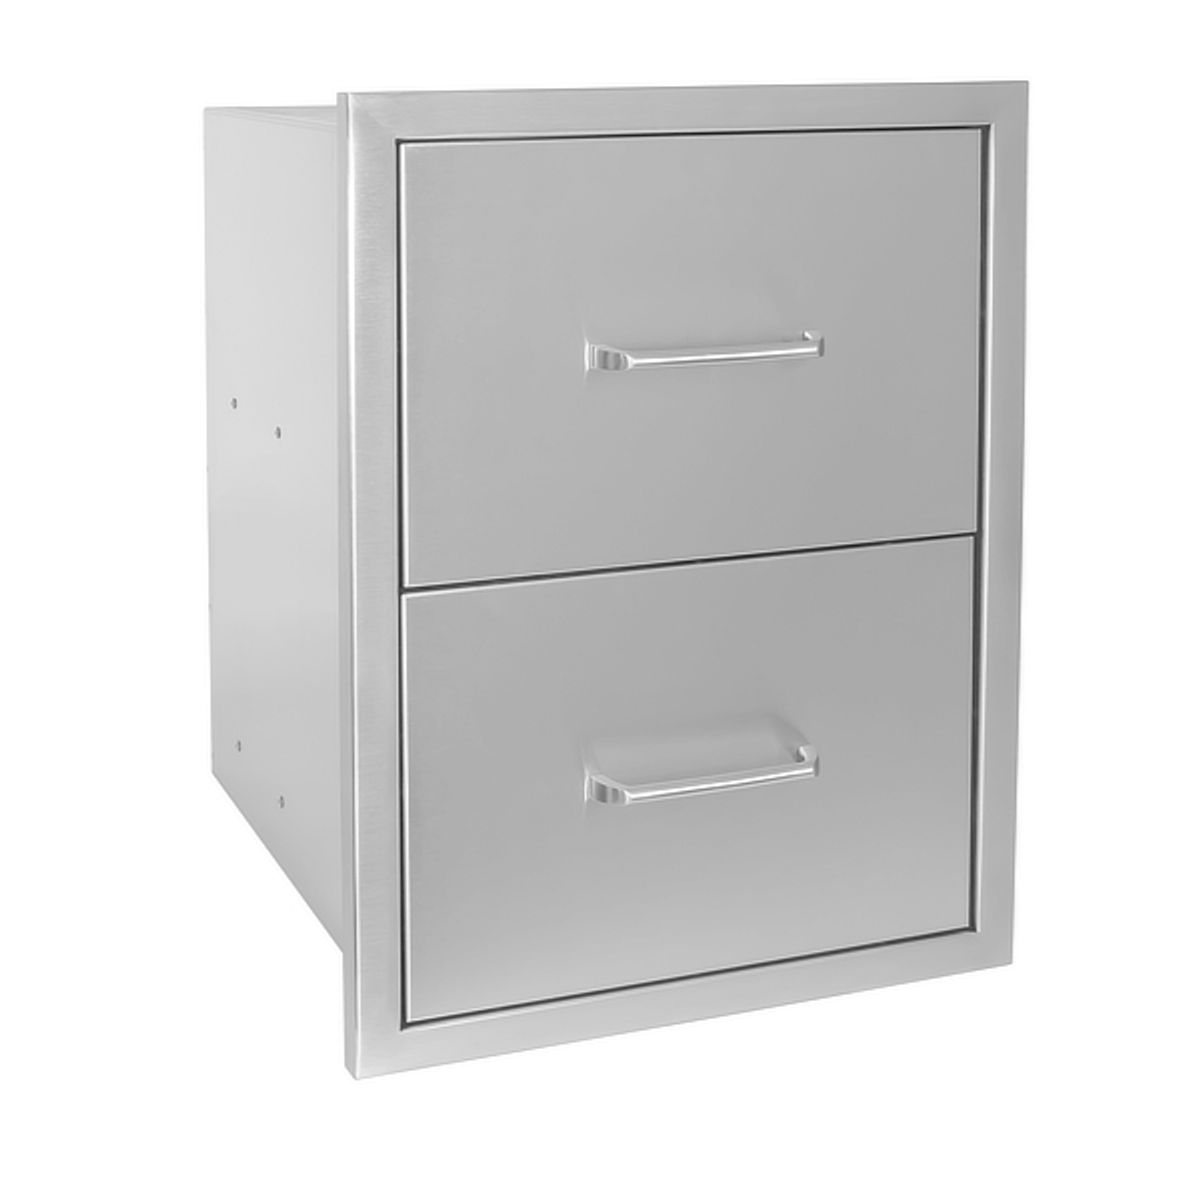 Wildfire Outdoor Double Drawer 16"x22" - Stainless Steel